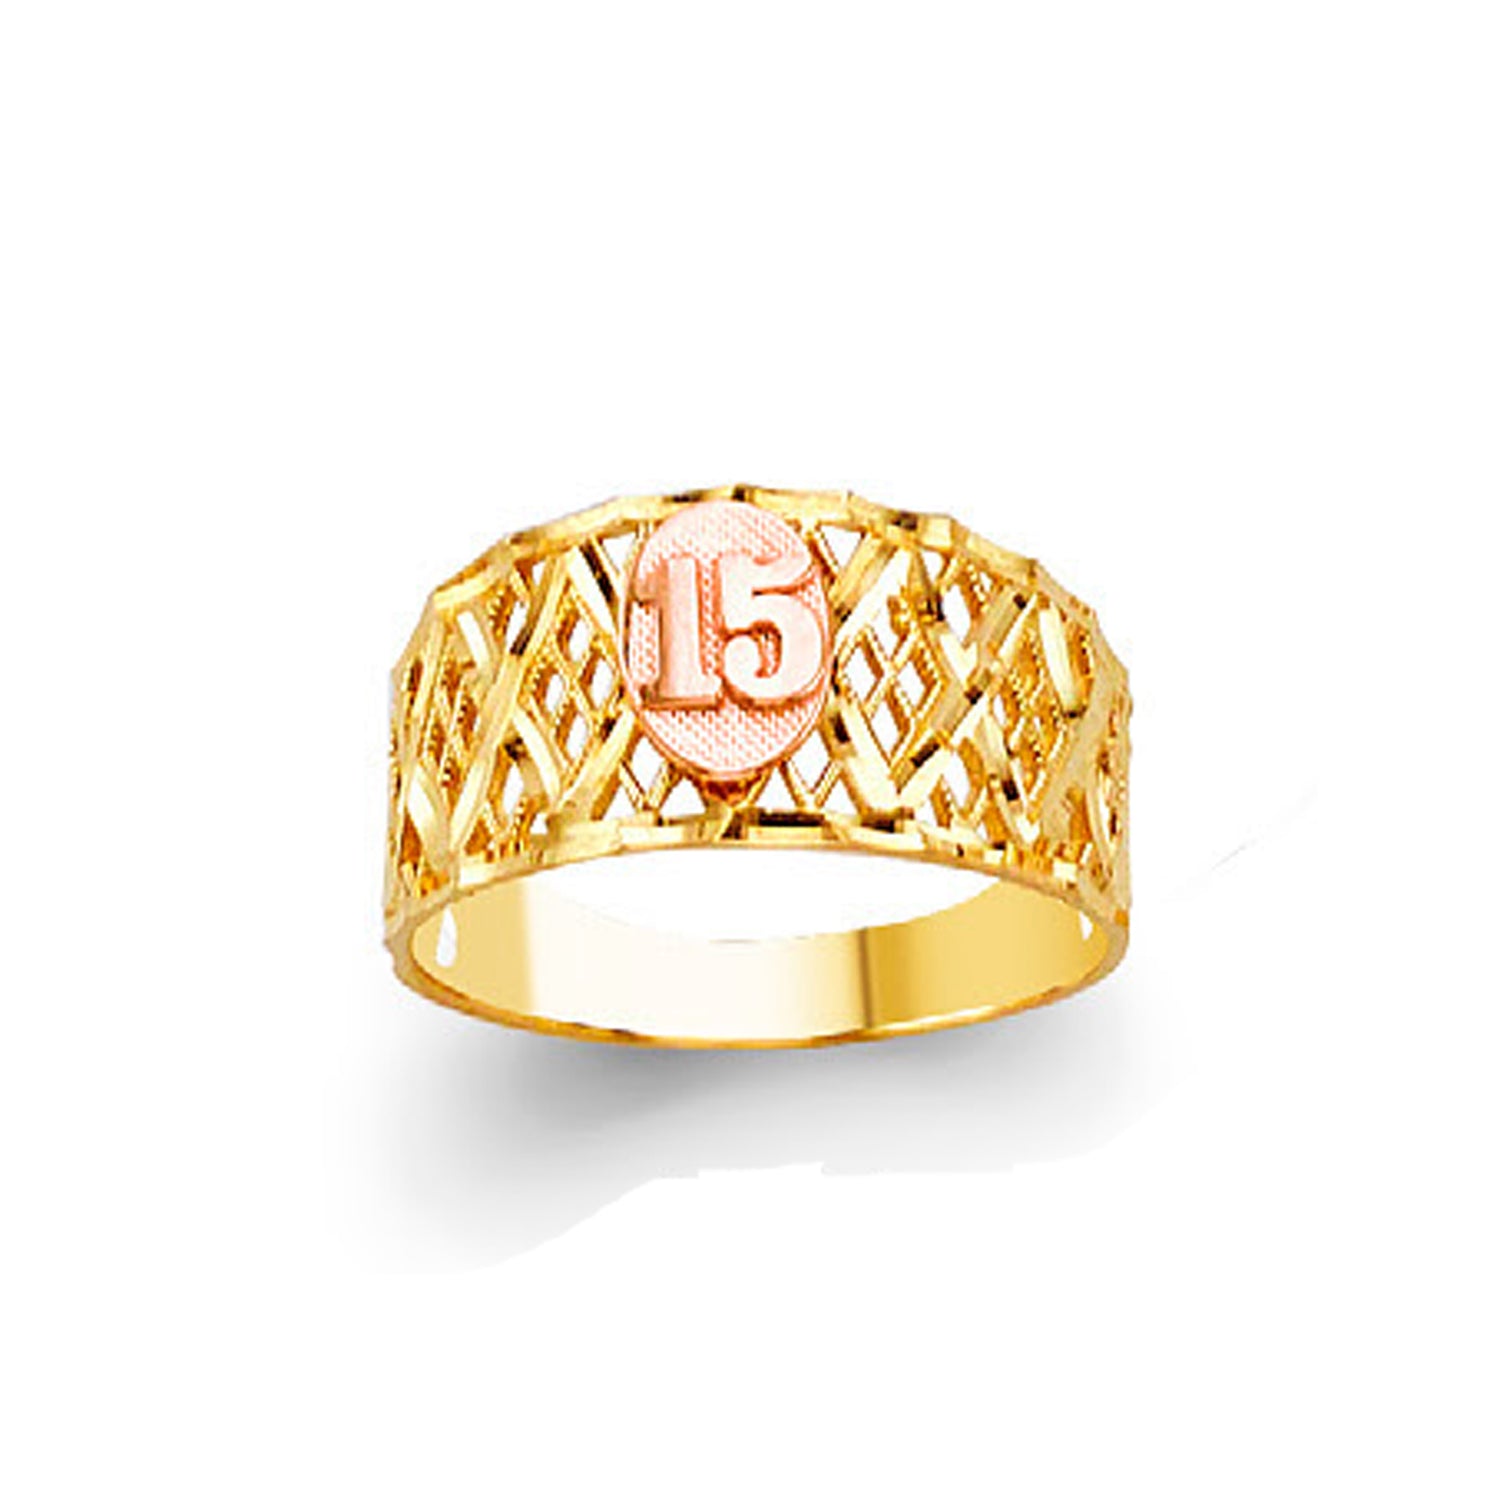 Lustrous Lattice 15 Anos Ring in Solid Gold 